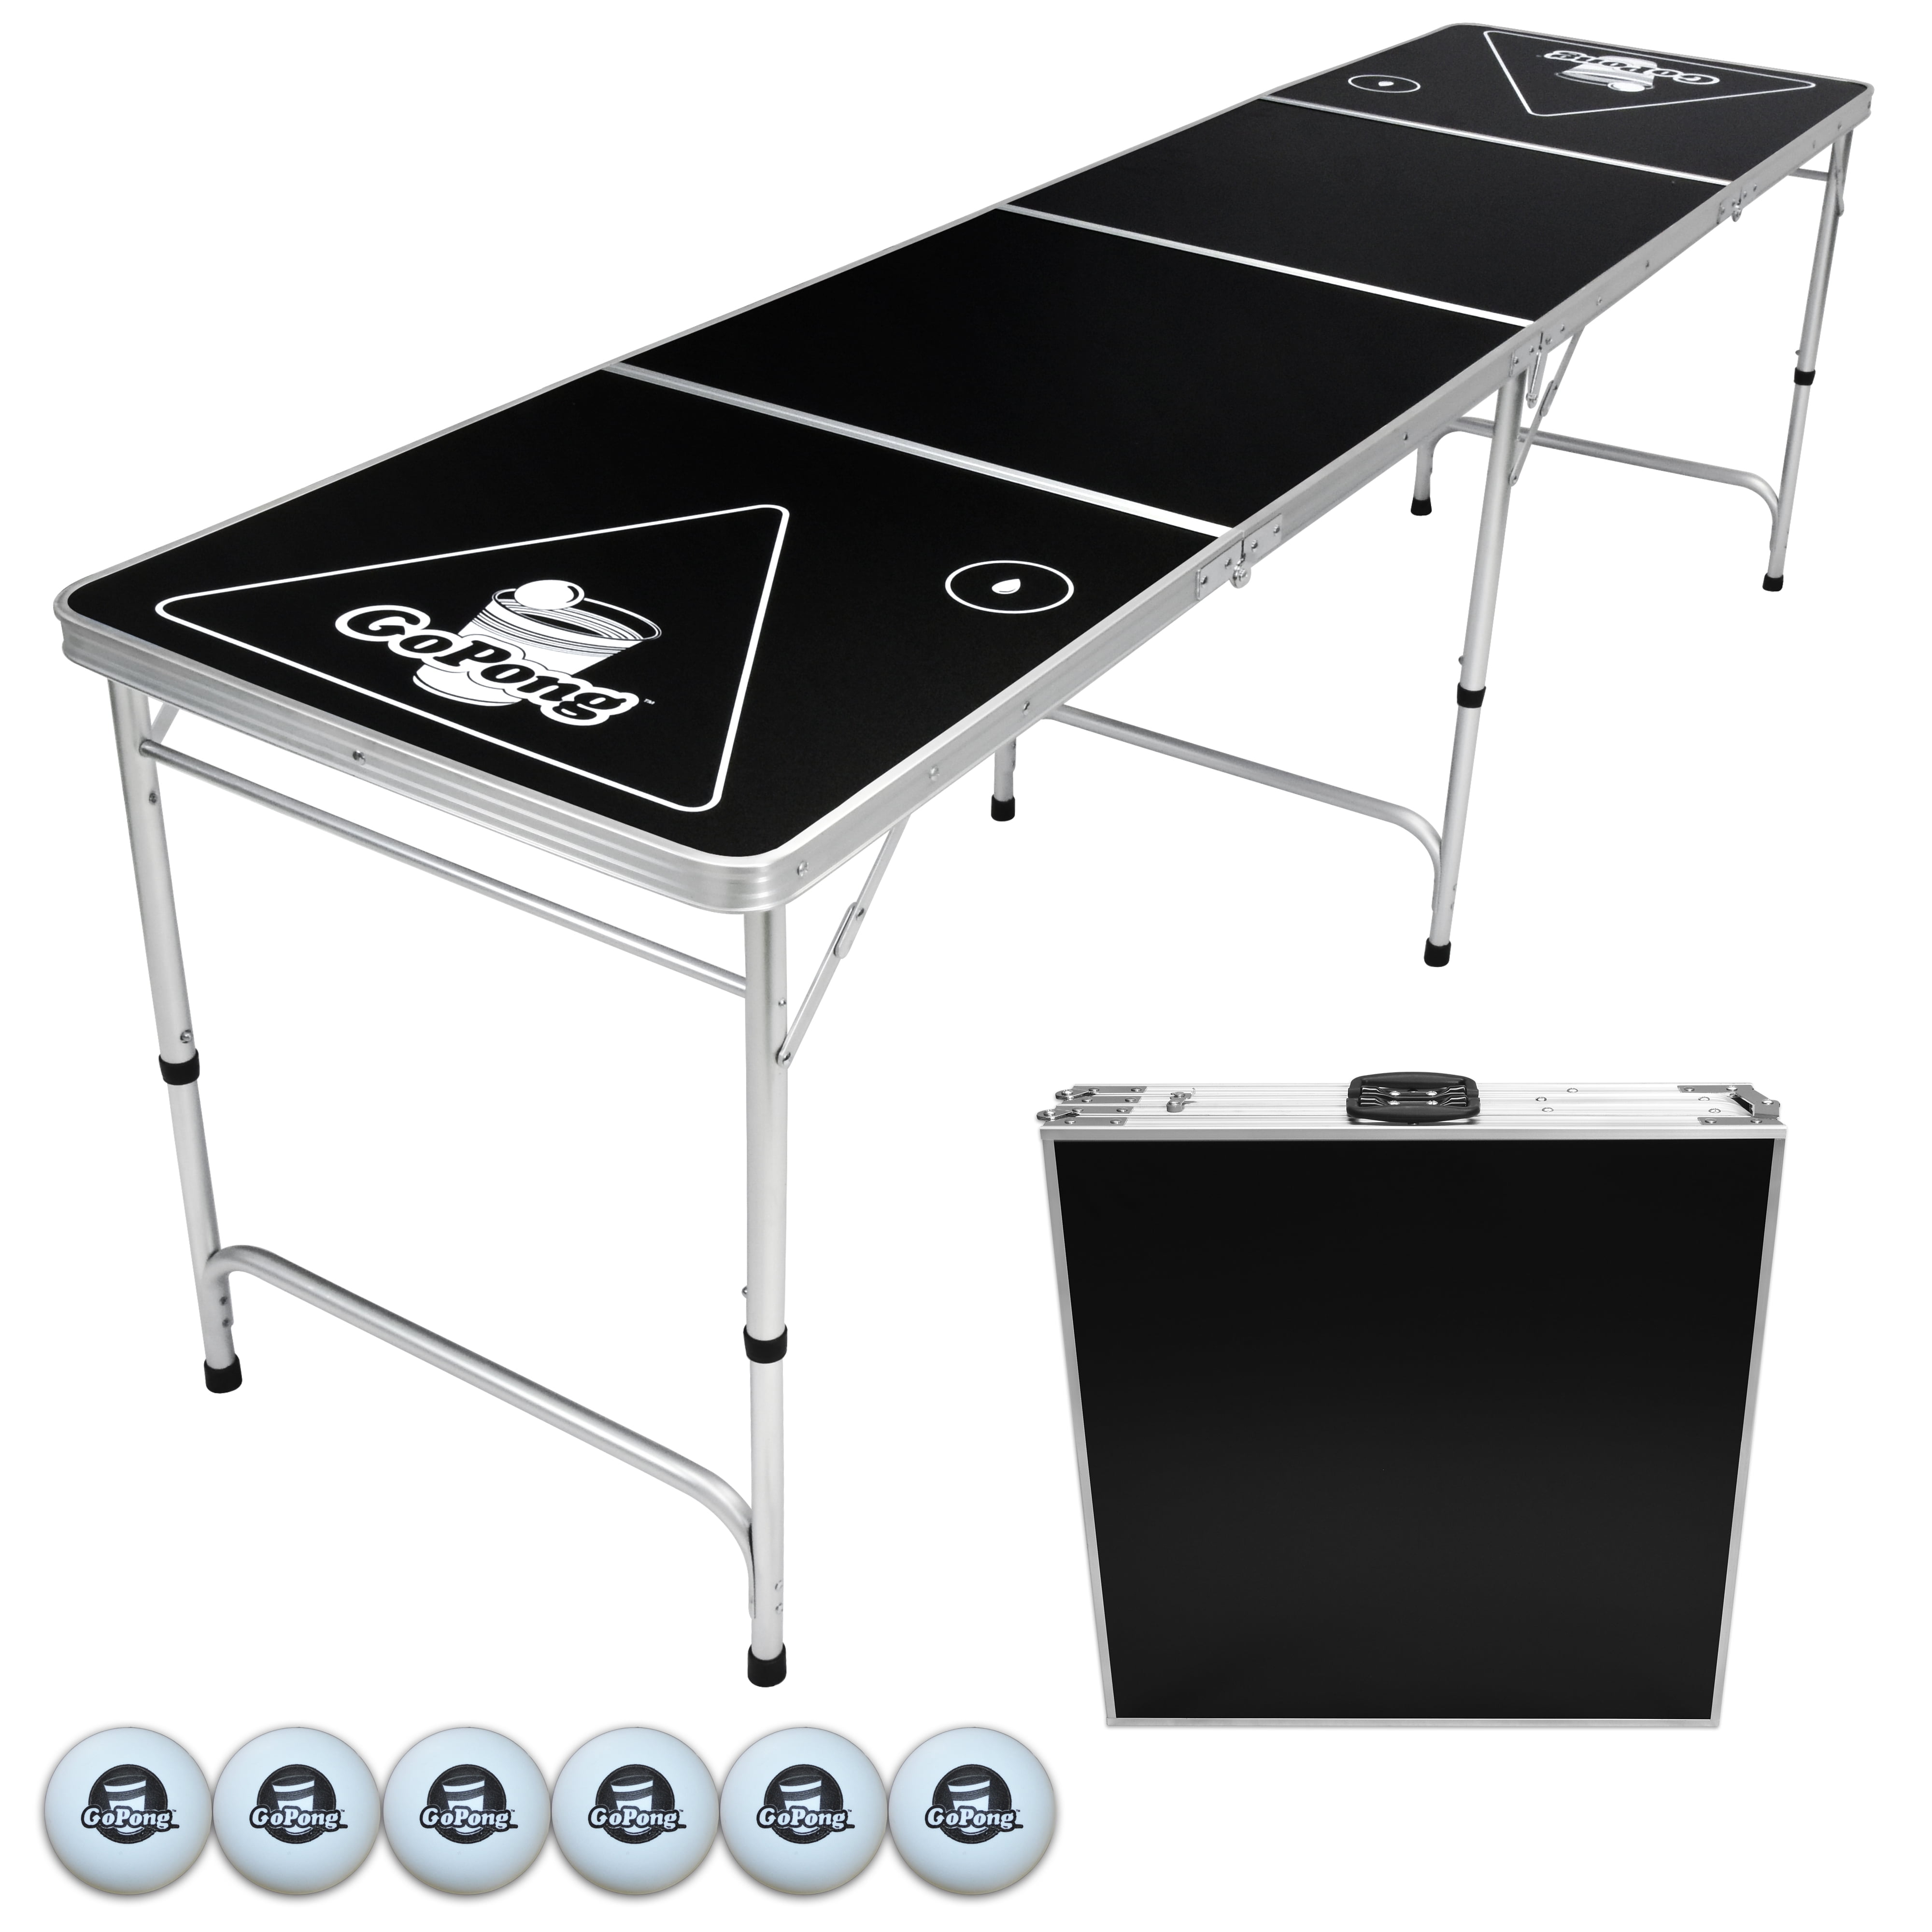 8' Collapsible Fold Beer Pong Game Table,LED Light Cup Holder-Black White  Girls